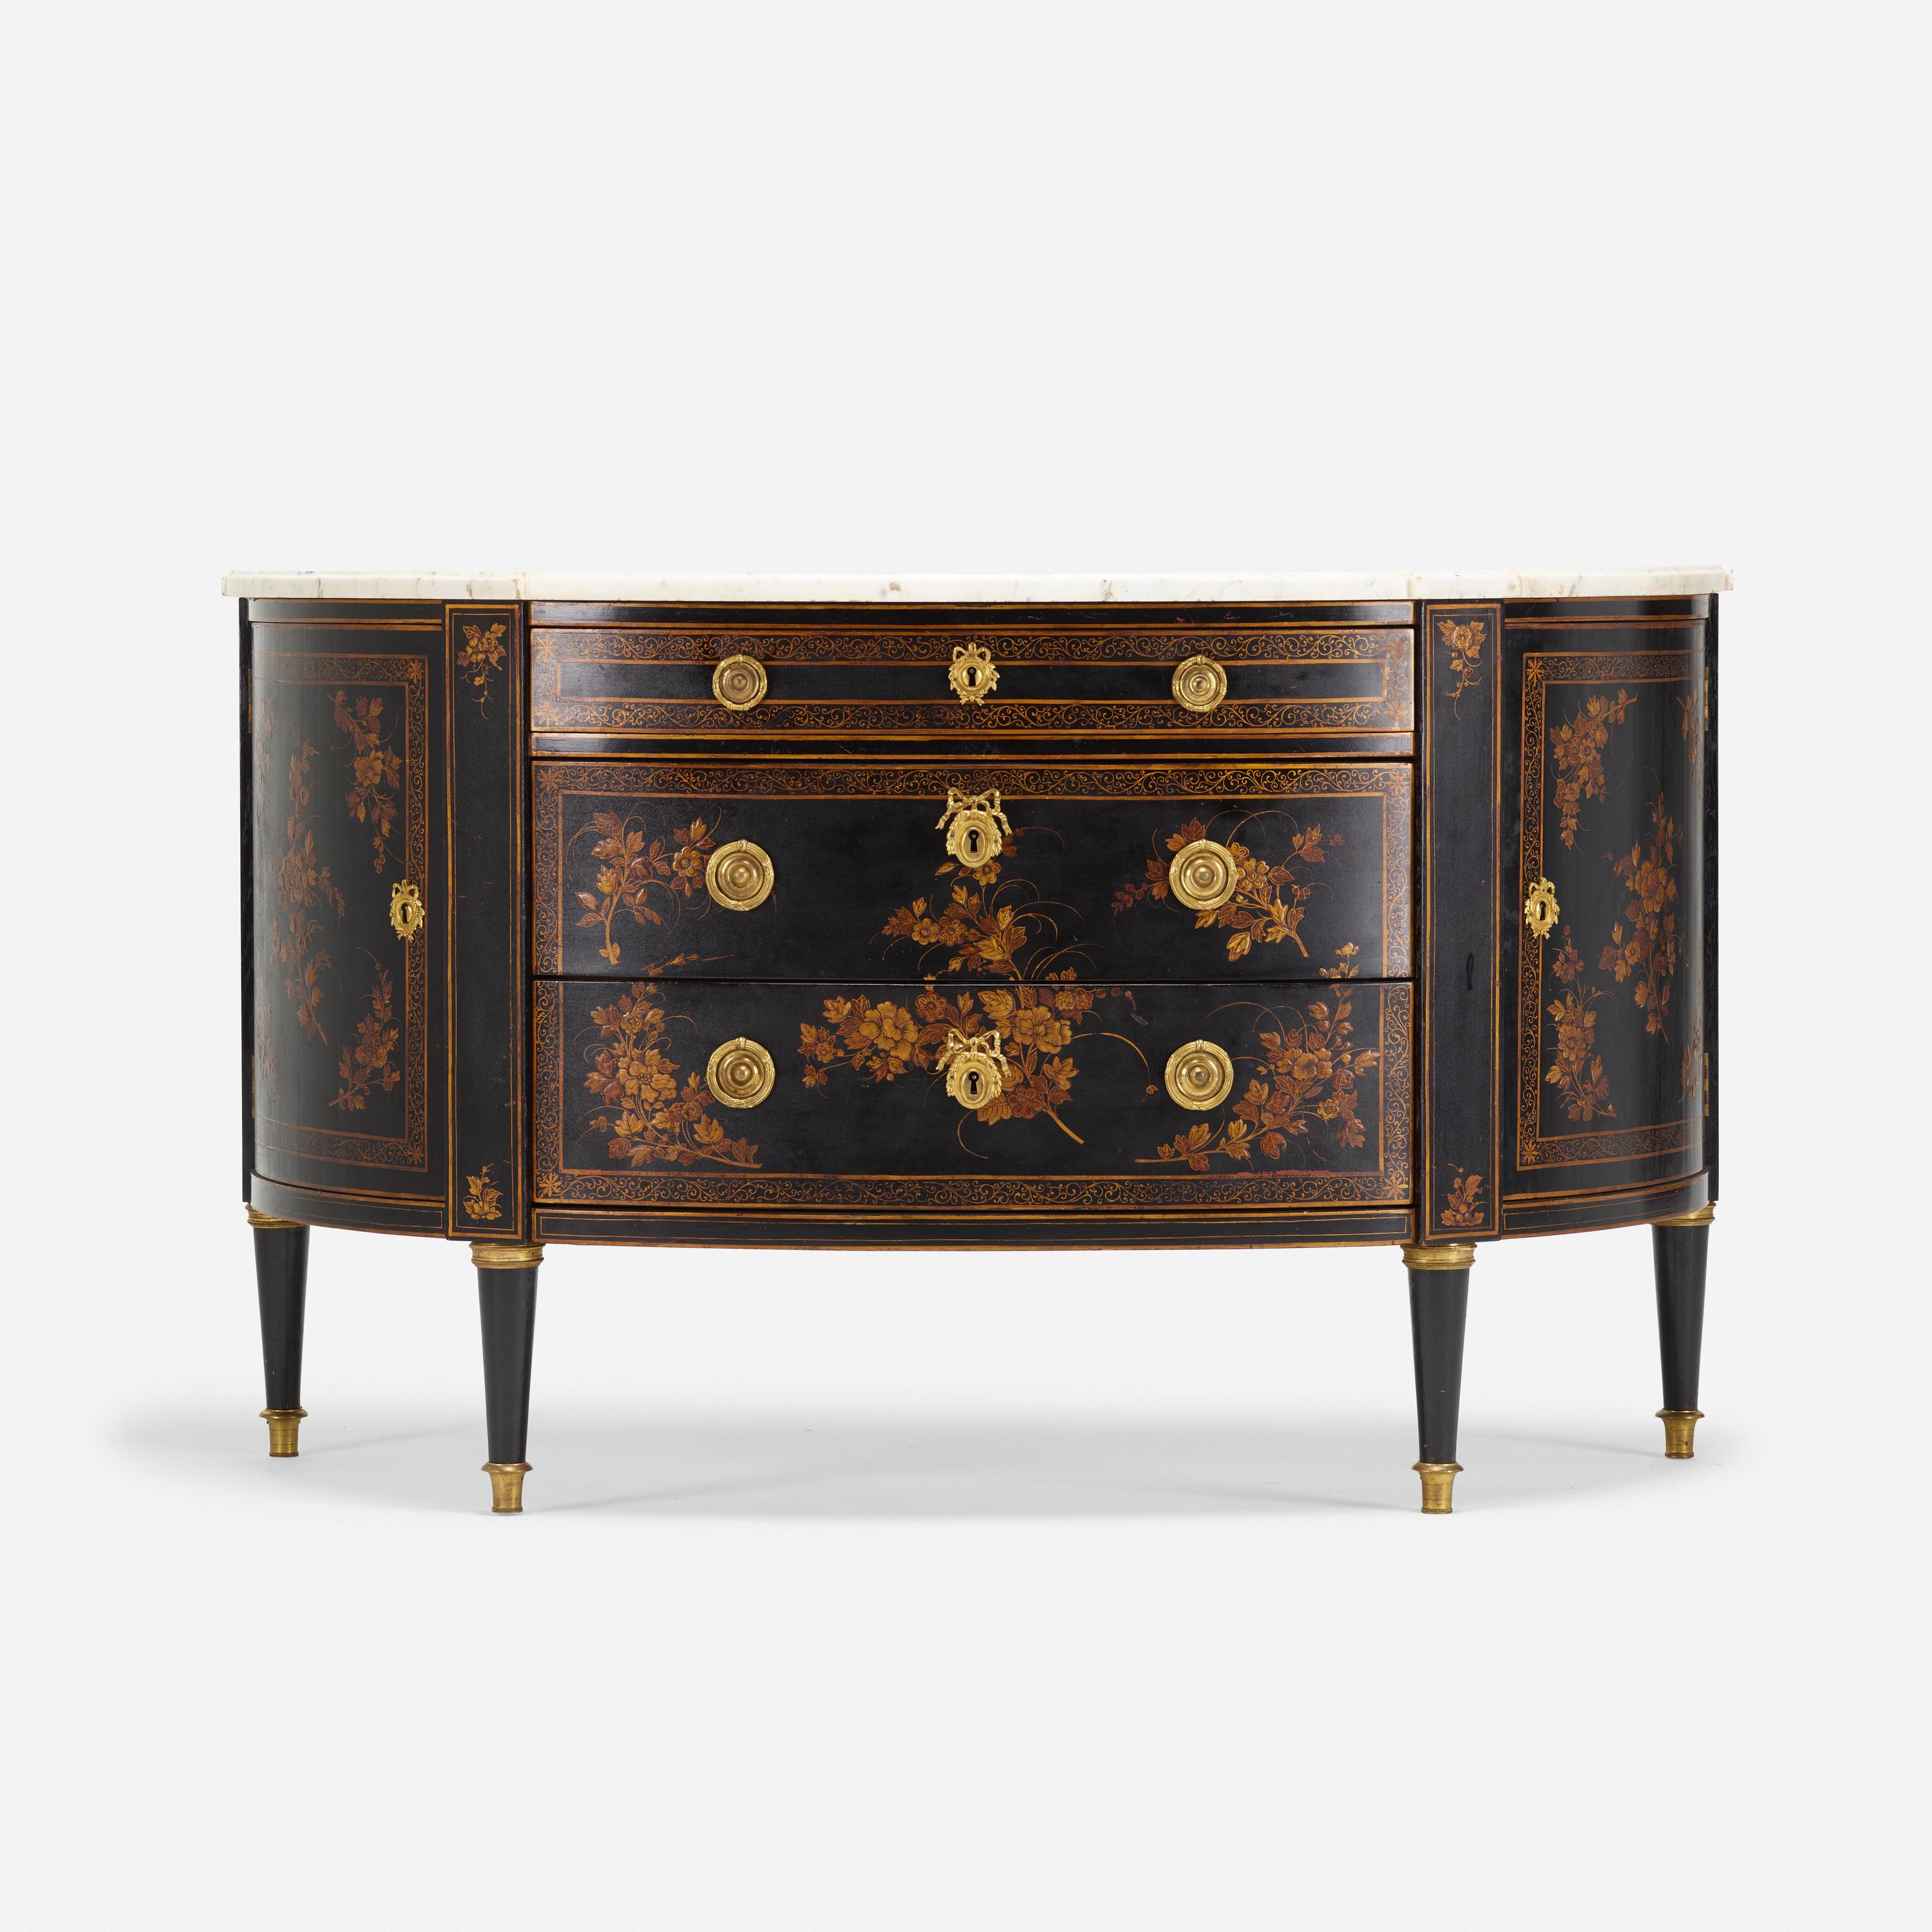 
Elegant Louis XVI style japanned lacquered demi lune commode decorated with hand painted and gilt floral motifs by Maison Krieger . Fitted with white Carrara marble top and fine gilt bronze mounts .Signed : ‘Krieger’ . 
 